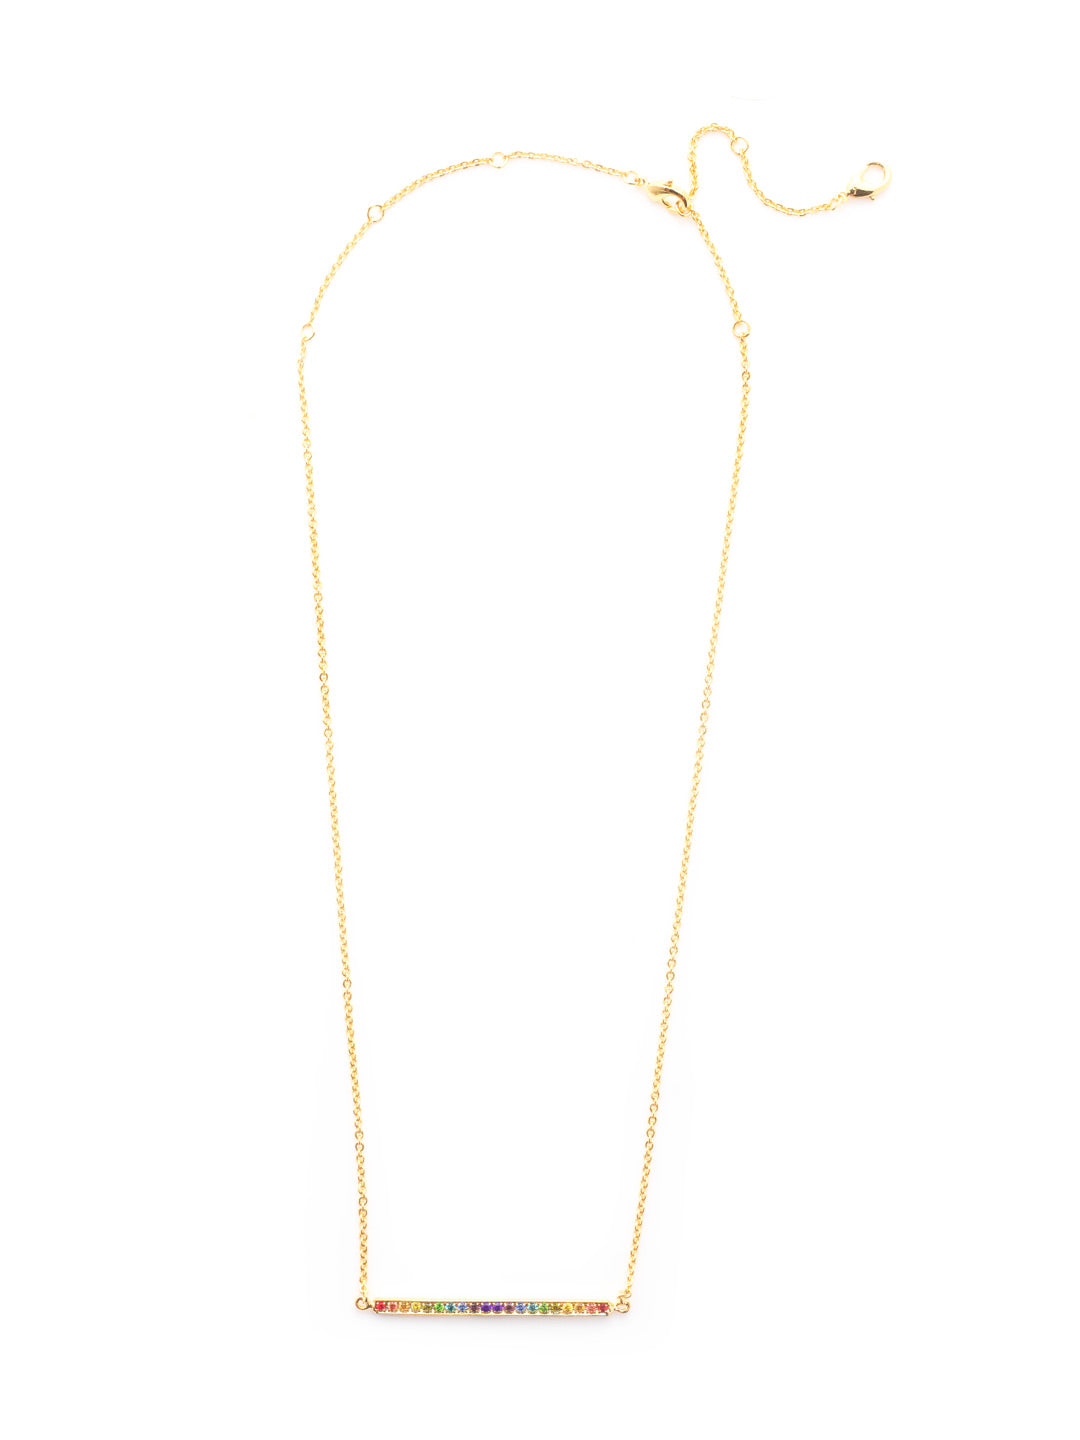 Rhinstone Bar Pendant Necklace - NDD1BGPRI - <p>Featuring a crystal encrusted bar, this pendant adds the perfect amount of sparkle to any outfit. Wear on its own or layer with your favorite delicate pendants. From Sorrelli's Prism collection in our Bright Gold-tone finish.</p>